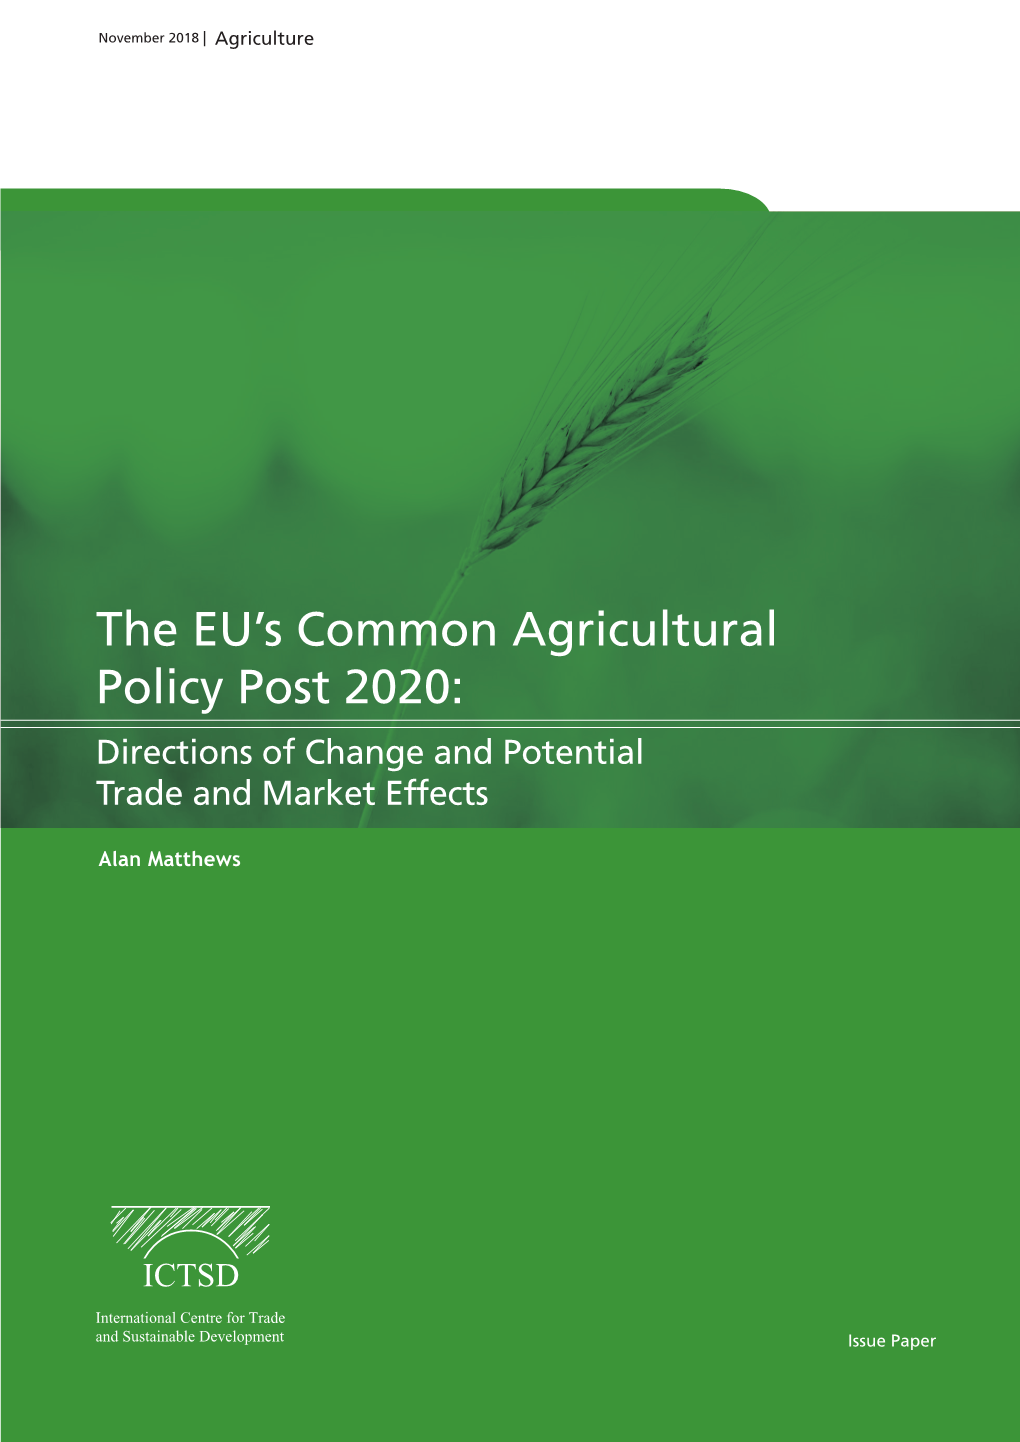 The EU's Common Agricultural Policy Post 2020